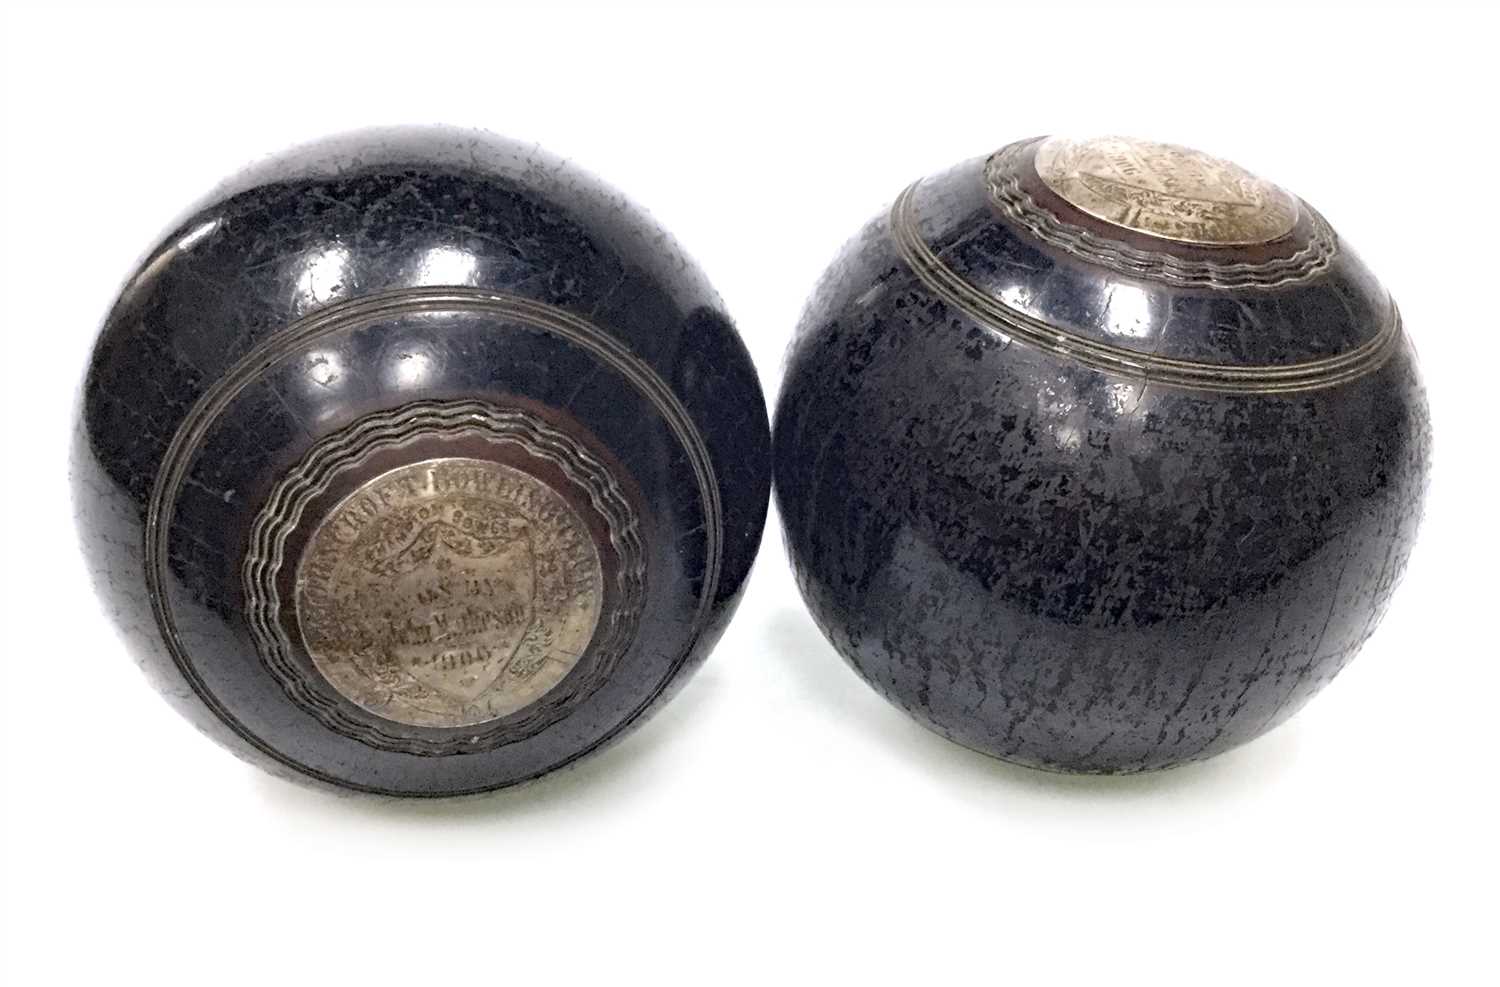 Lot 1912 - A PAIR OF EARLY 20TH CENTURY PRESENTATION LAWN BOWLS